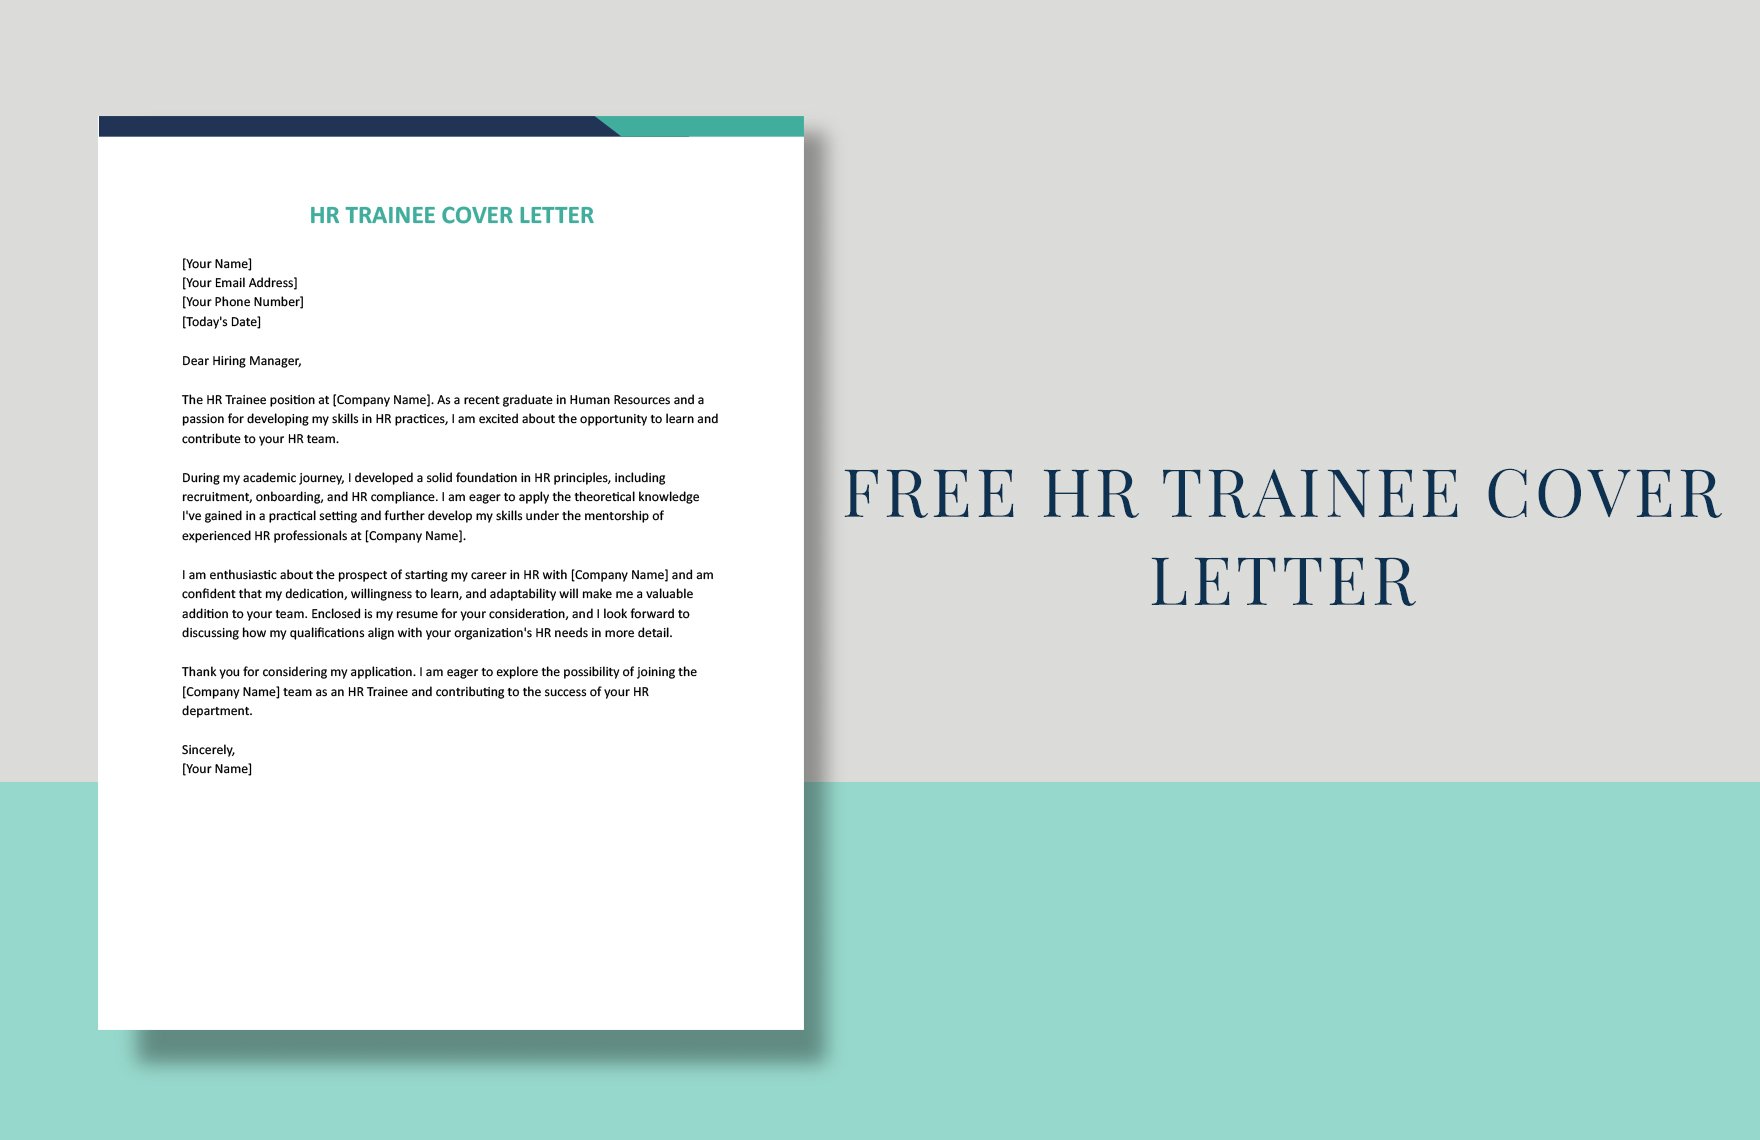 HR Trainee Cover Letter in Word, Google Docs